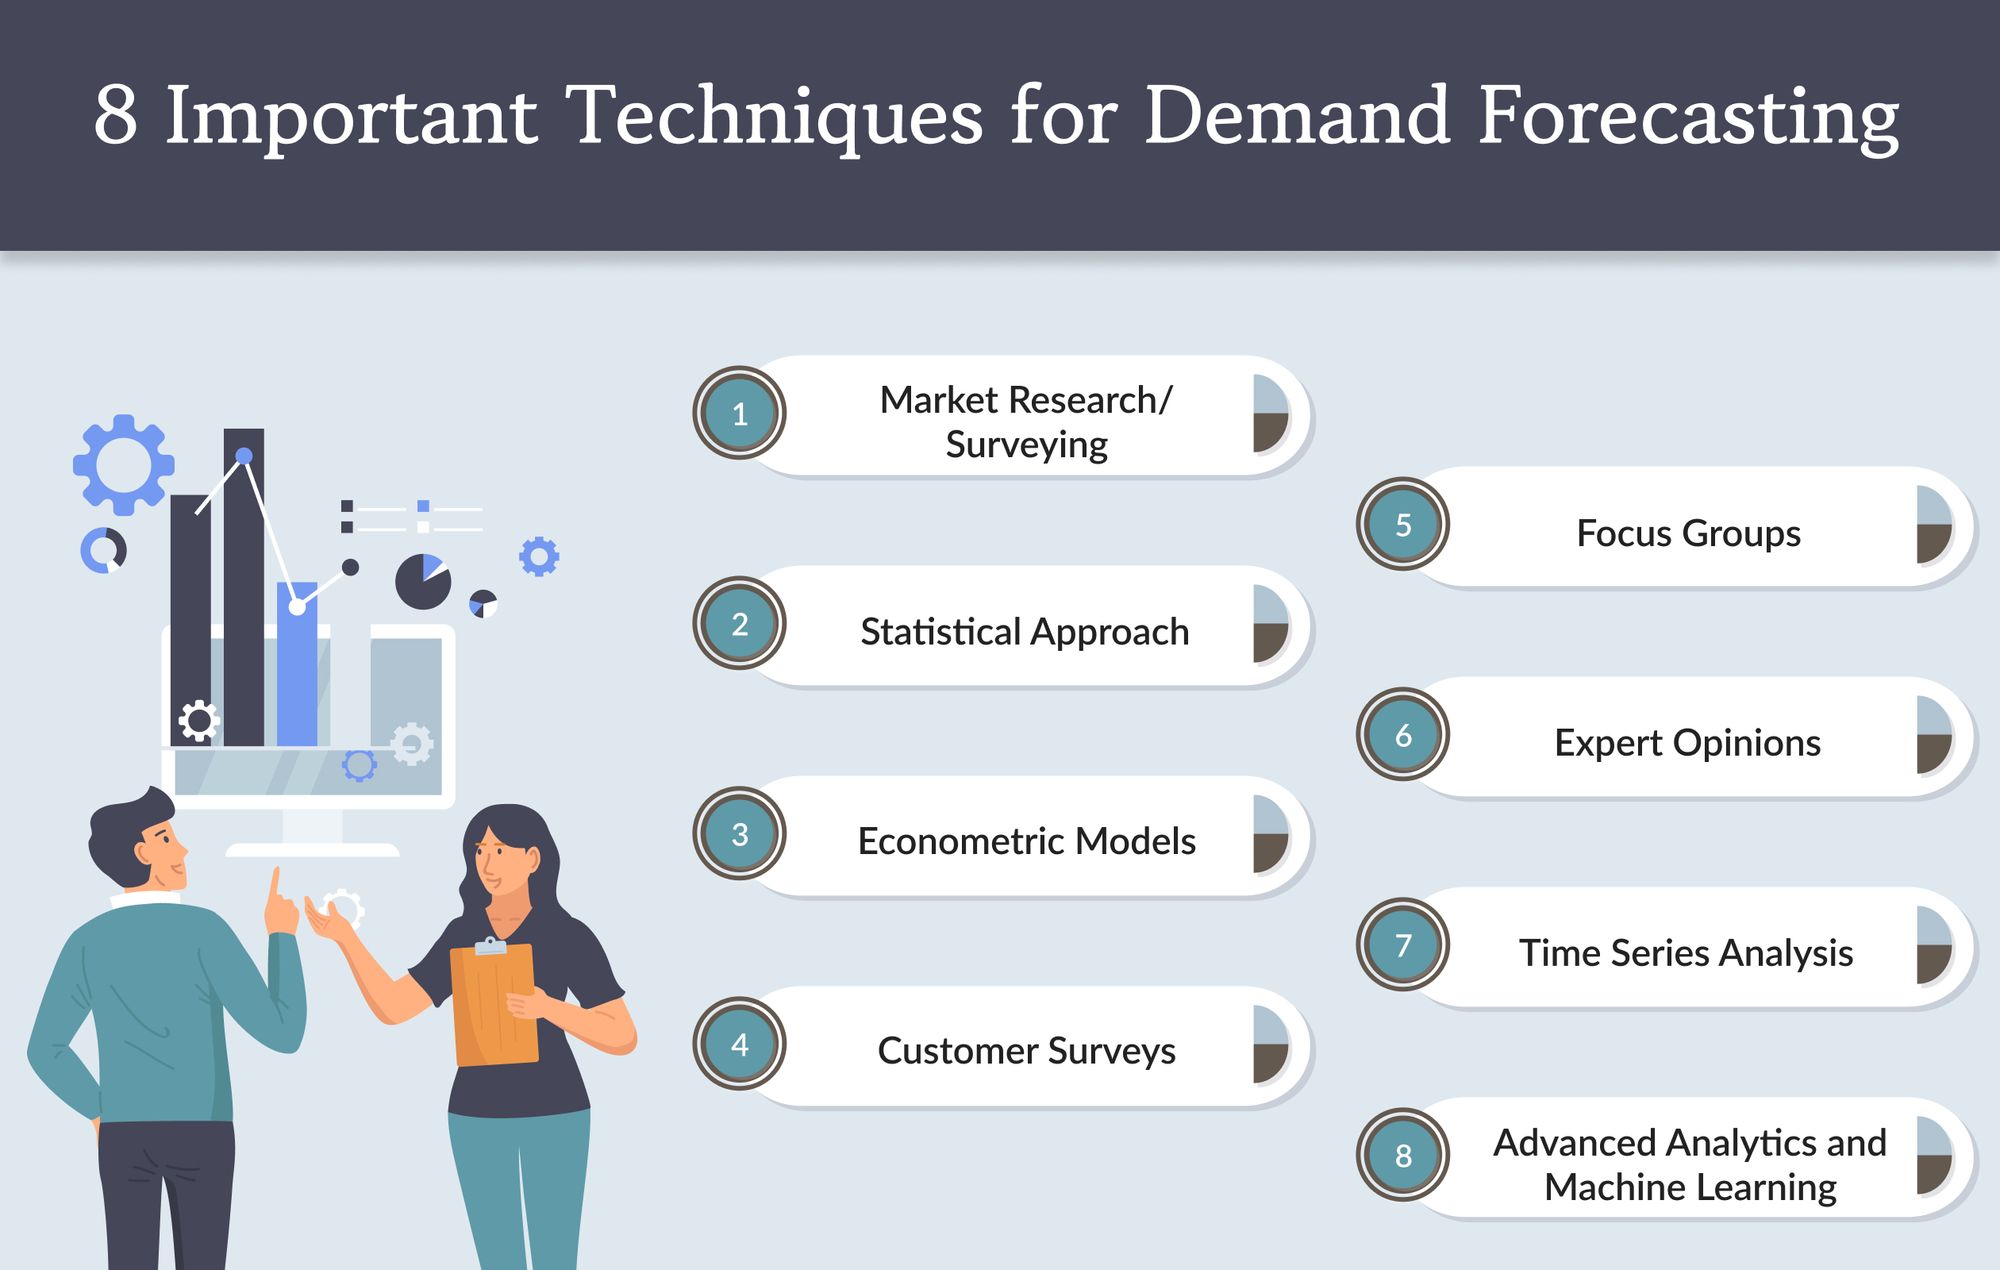 8 Important Techniques for Demand Forecasting